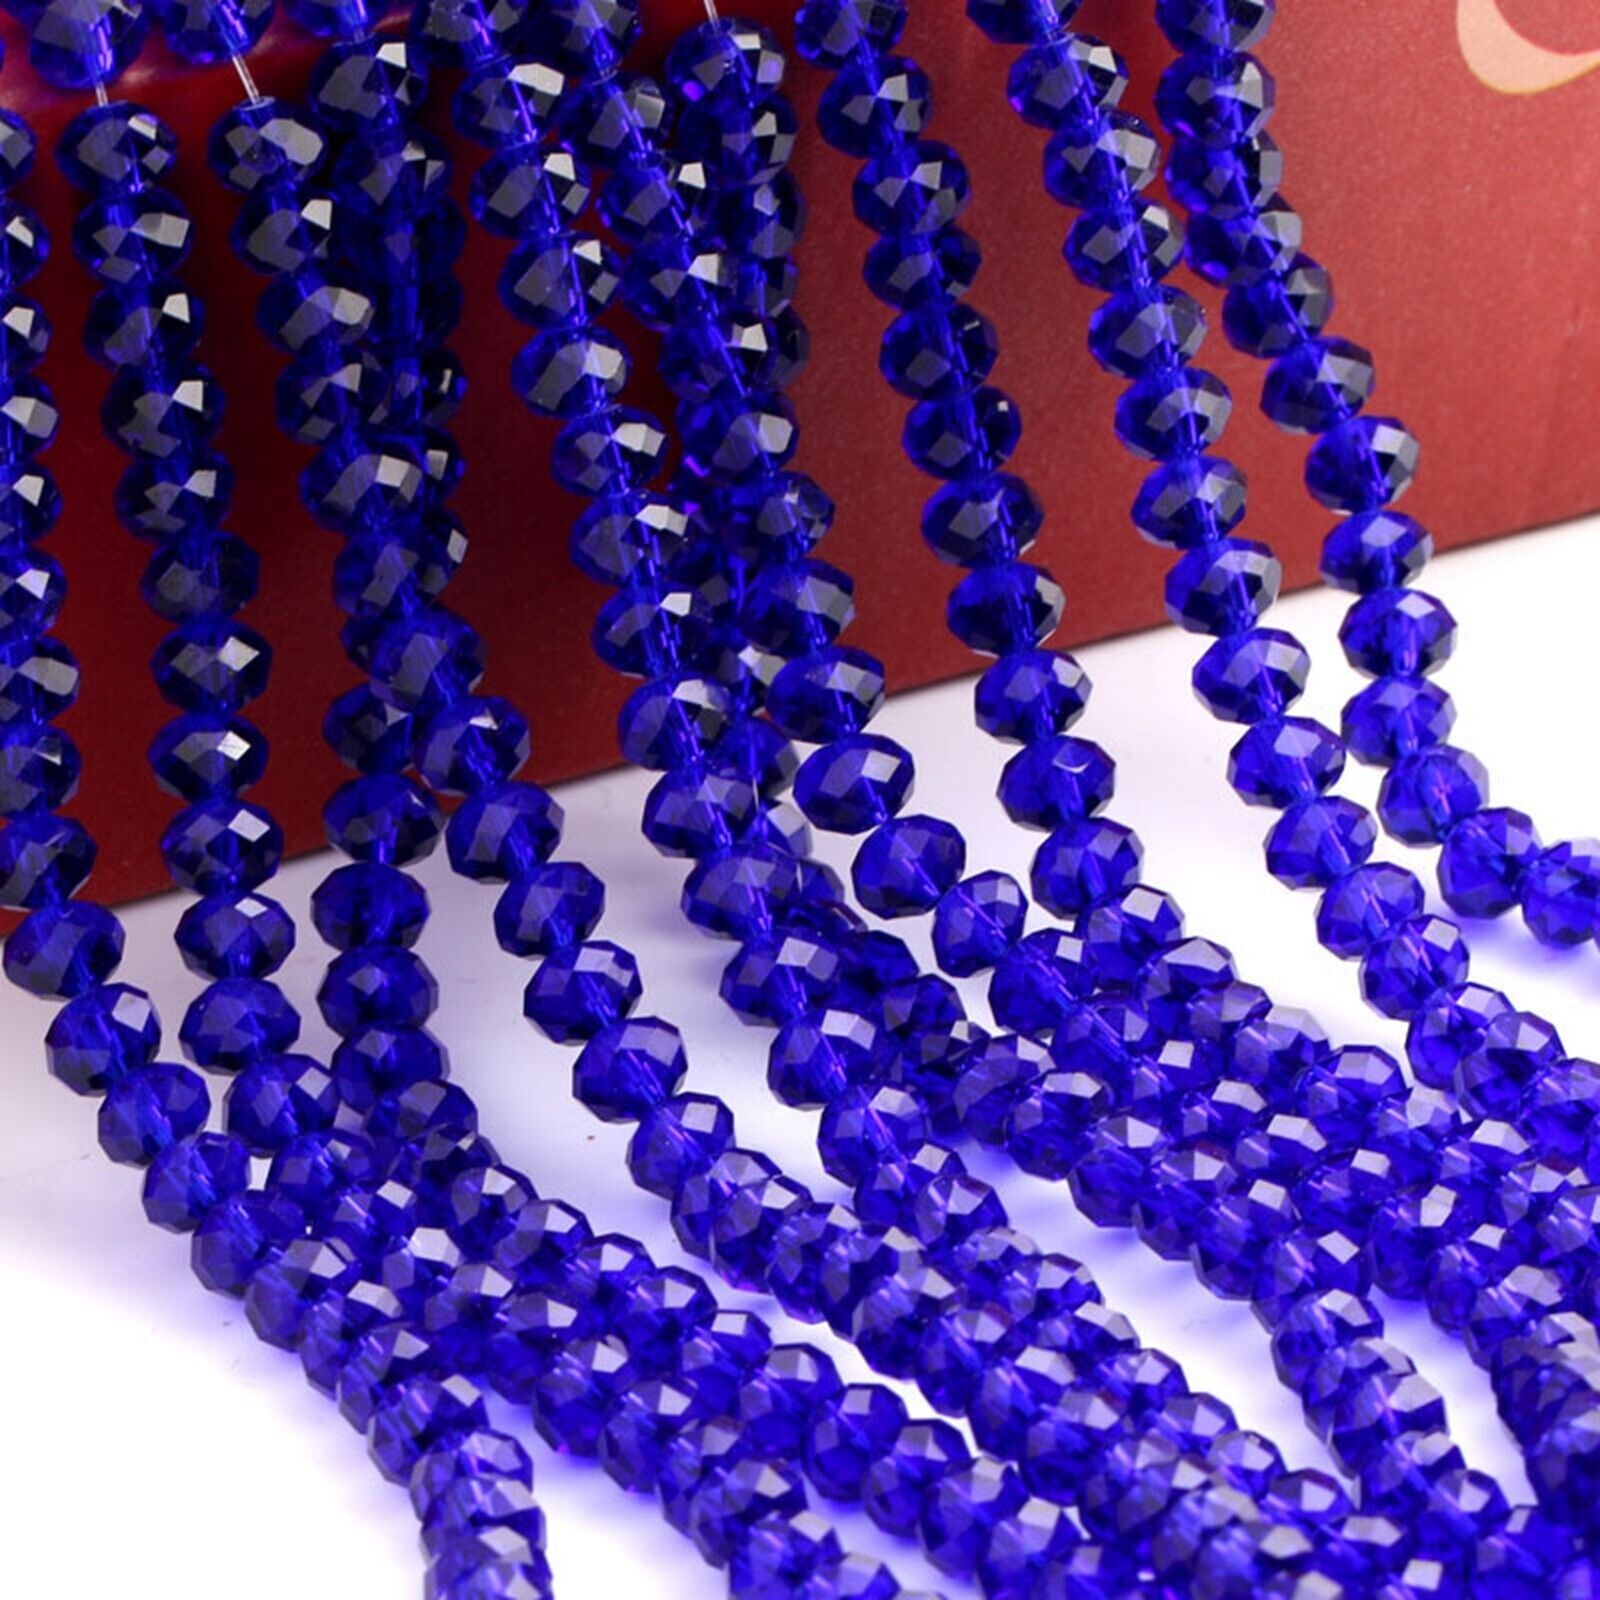 150pcs 2X3mm Faceted Rondelle Crystal Glass Beads ~ Royal Blue Jewelry Making